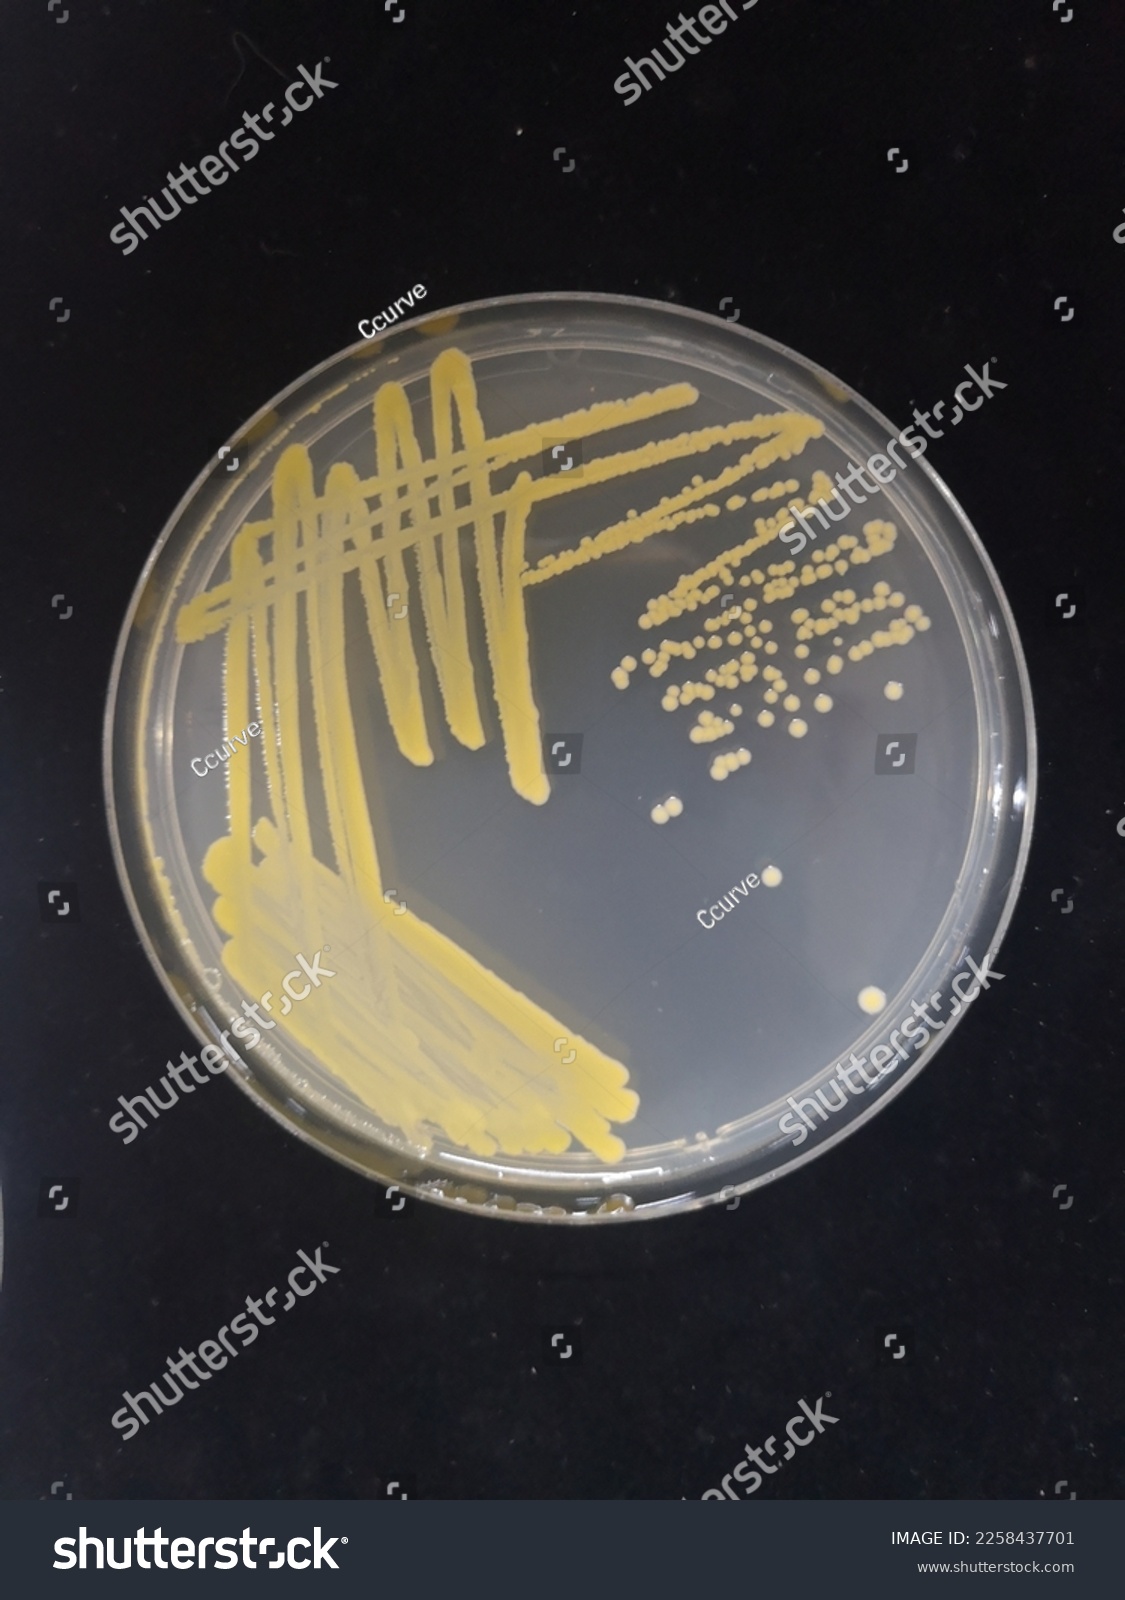 Staphylococcus aureus is a Gram-positive spherically shaped bacterium, a member of the Bacillota, and is a usual member of the microbiota of the body, frequently found in the upper respiratory tract  #2258437701